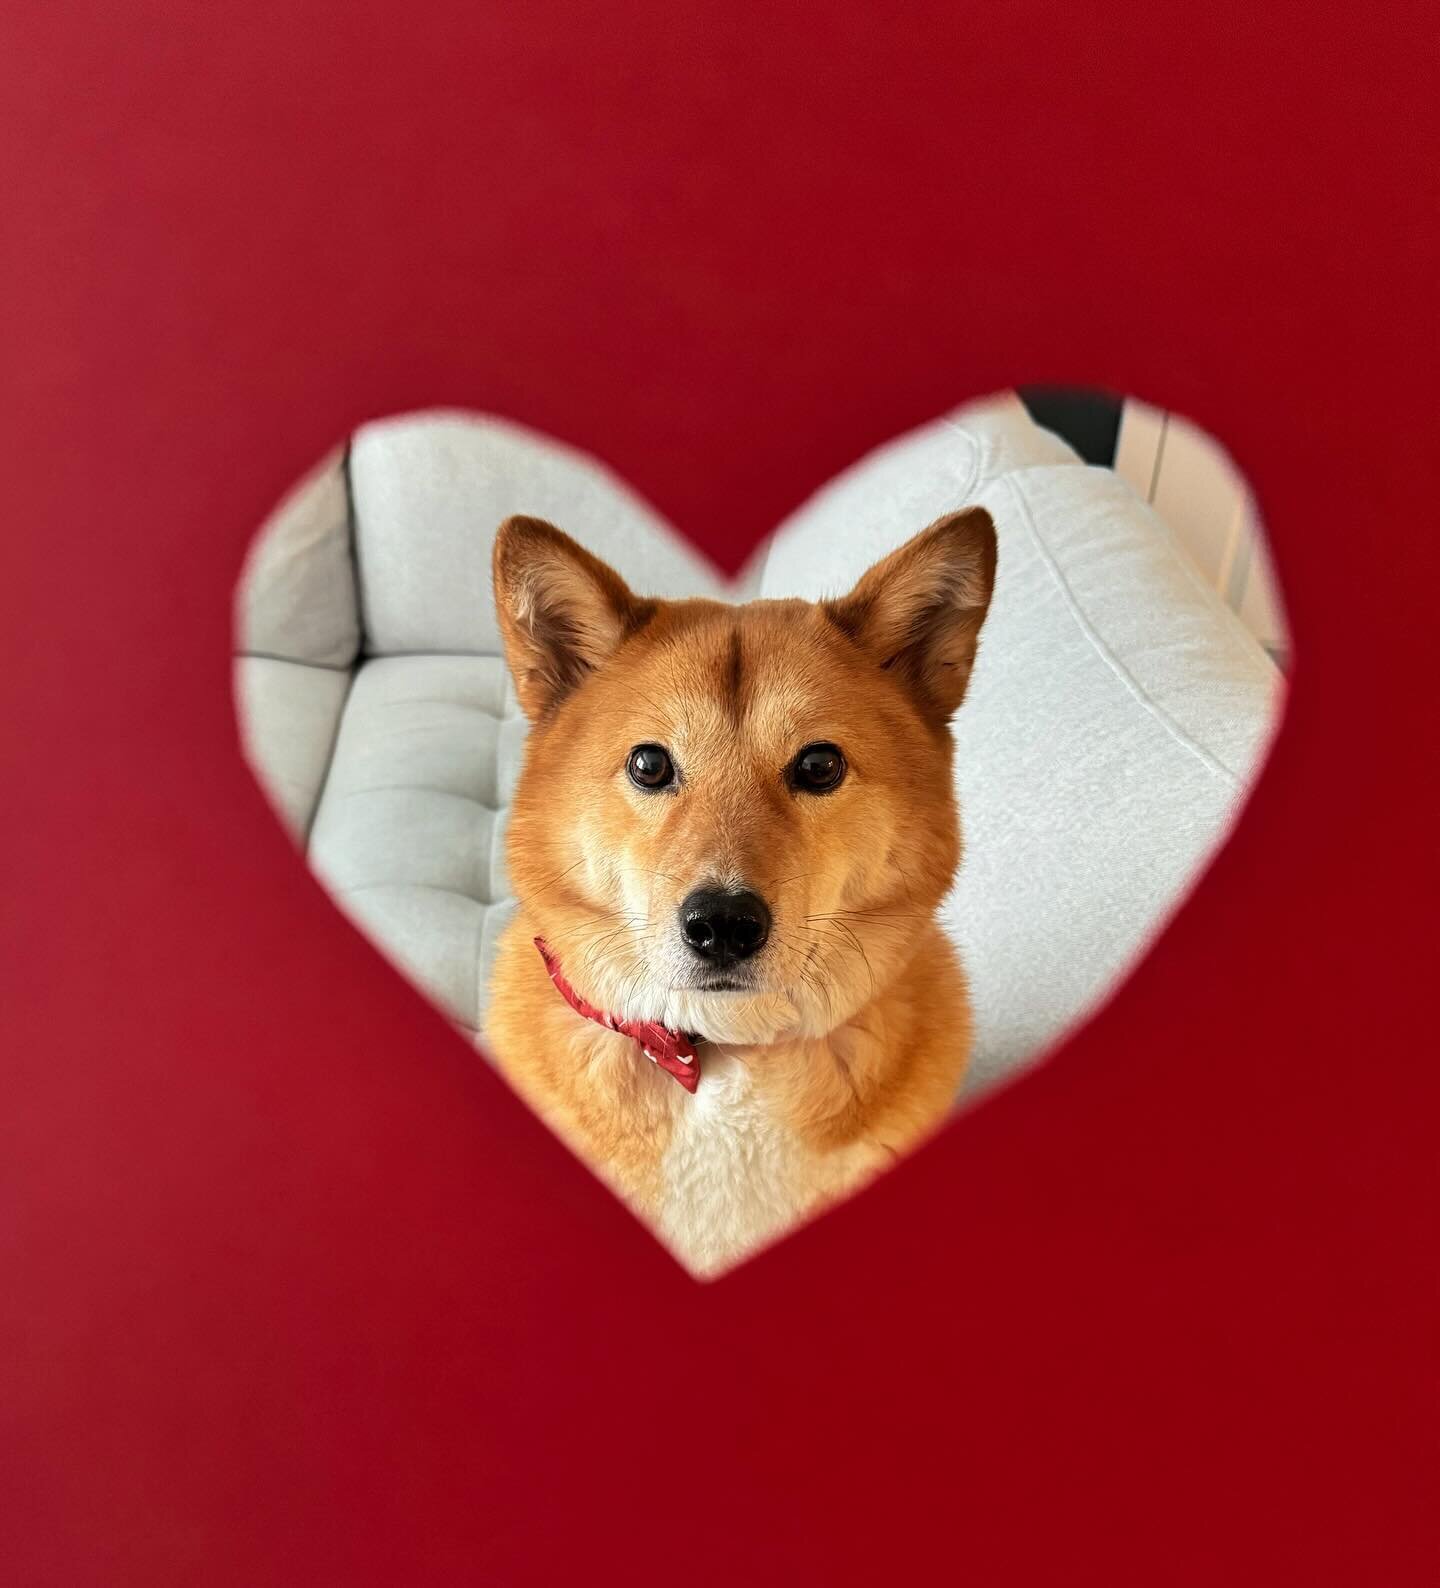 Can I follow you?
Because I was told to follow my dreams. 
Happy Valentine&rsquo;s Day! 💕 
#valentinedog #willyoubemyvalentine